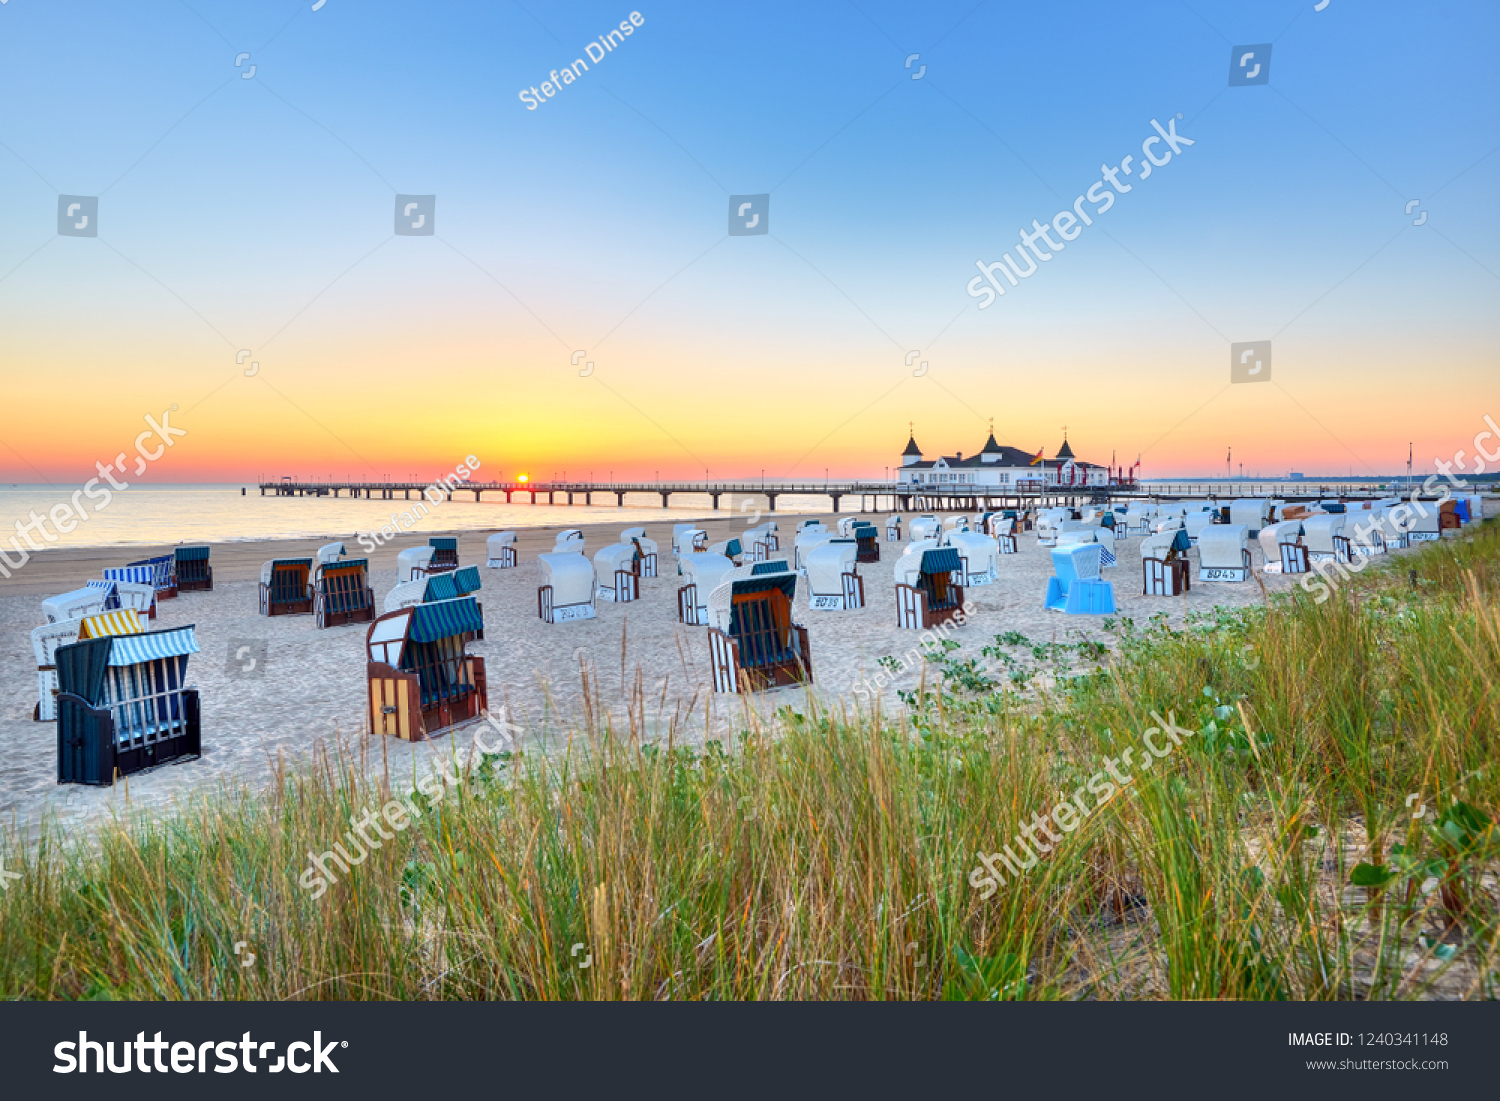 morning time at baltic sea beach and sight Ahlbeck pier in sunrise #1240341148